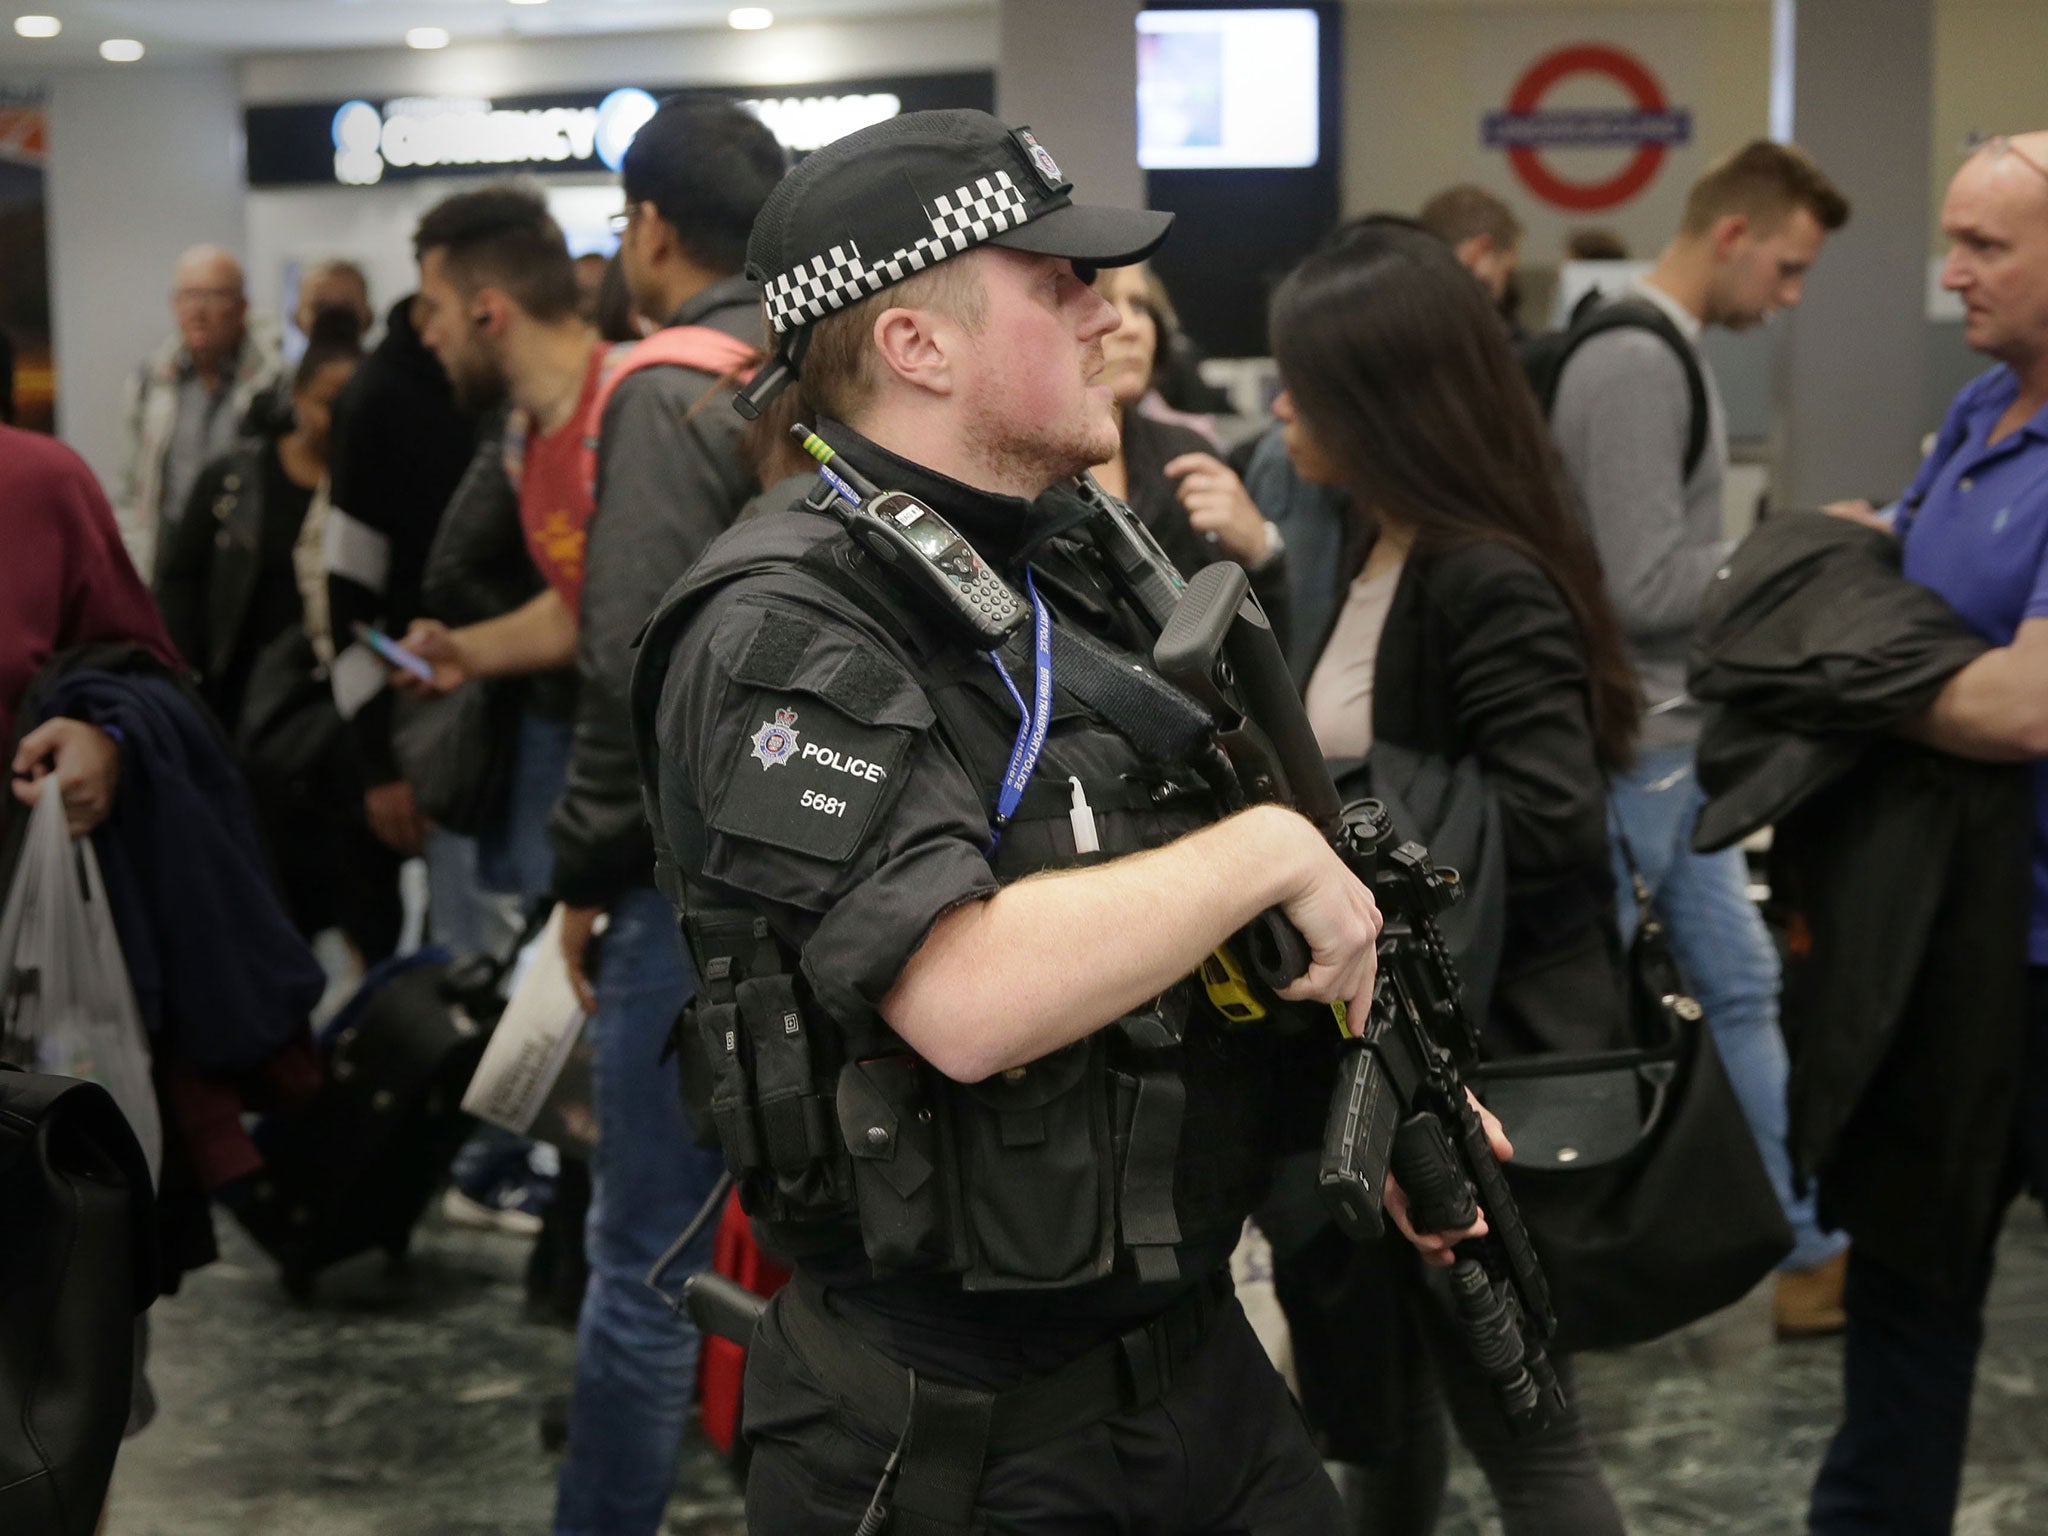 Armed police patrol at transport hubs have been increased after rush-hour attack